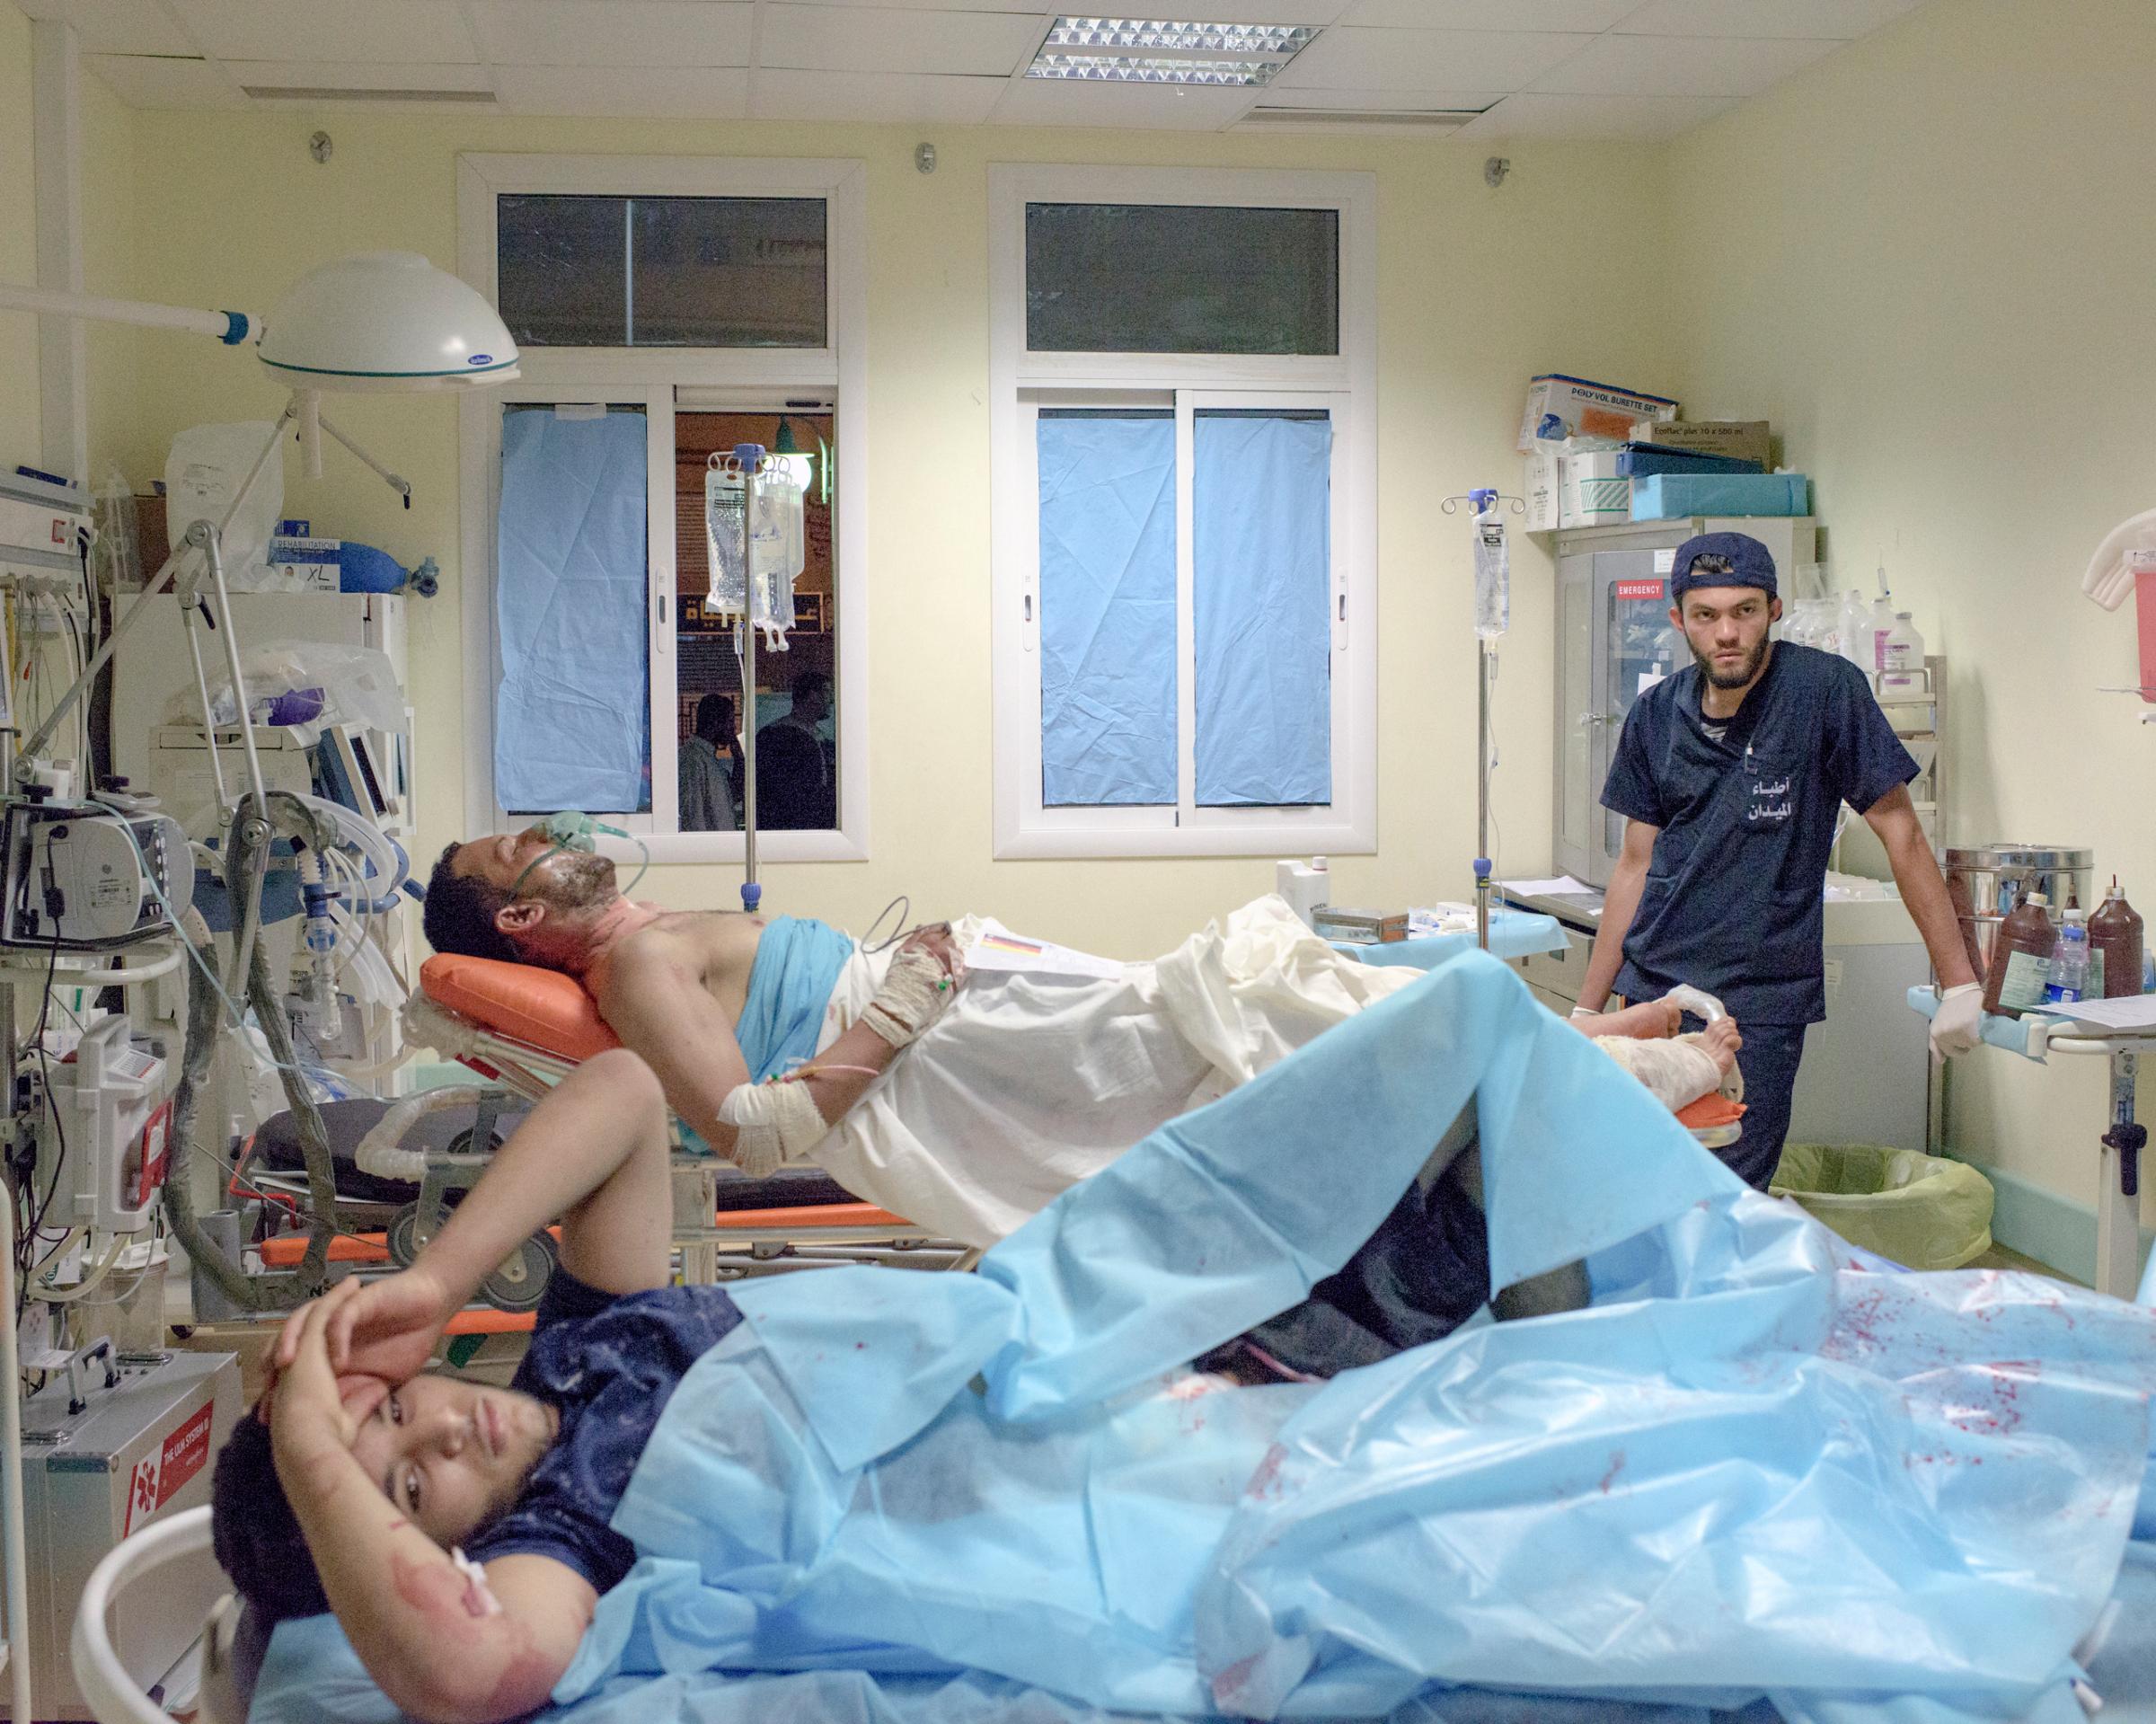 Two Libyan fighters who were wounded on the frontline against ISIS were taken to the emergency room of Misurata Central Hospital, Misurata. July 2016.